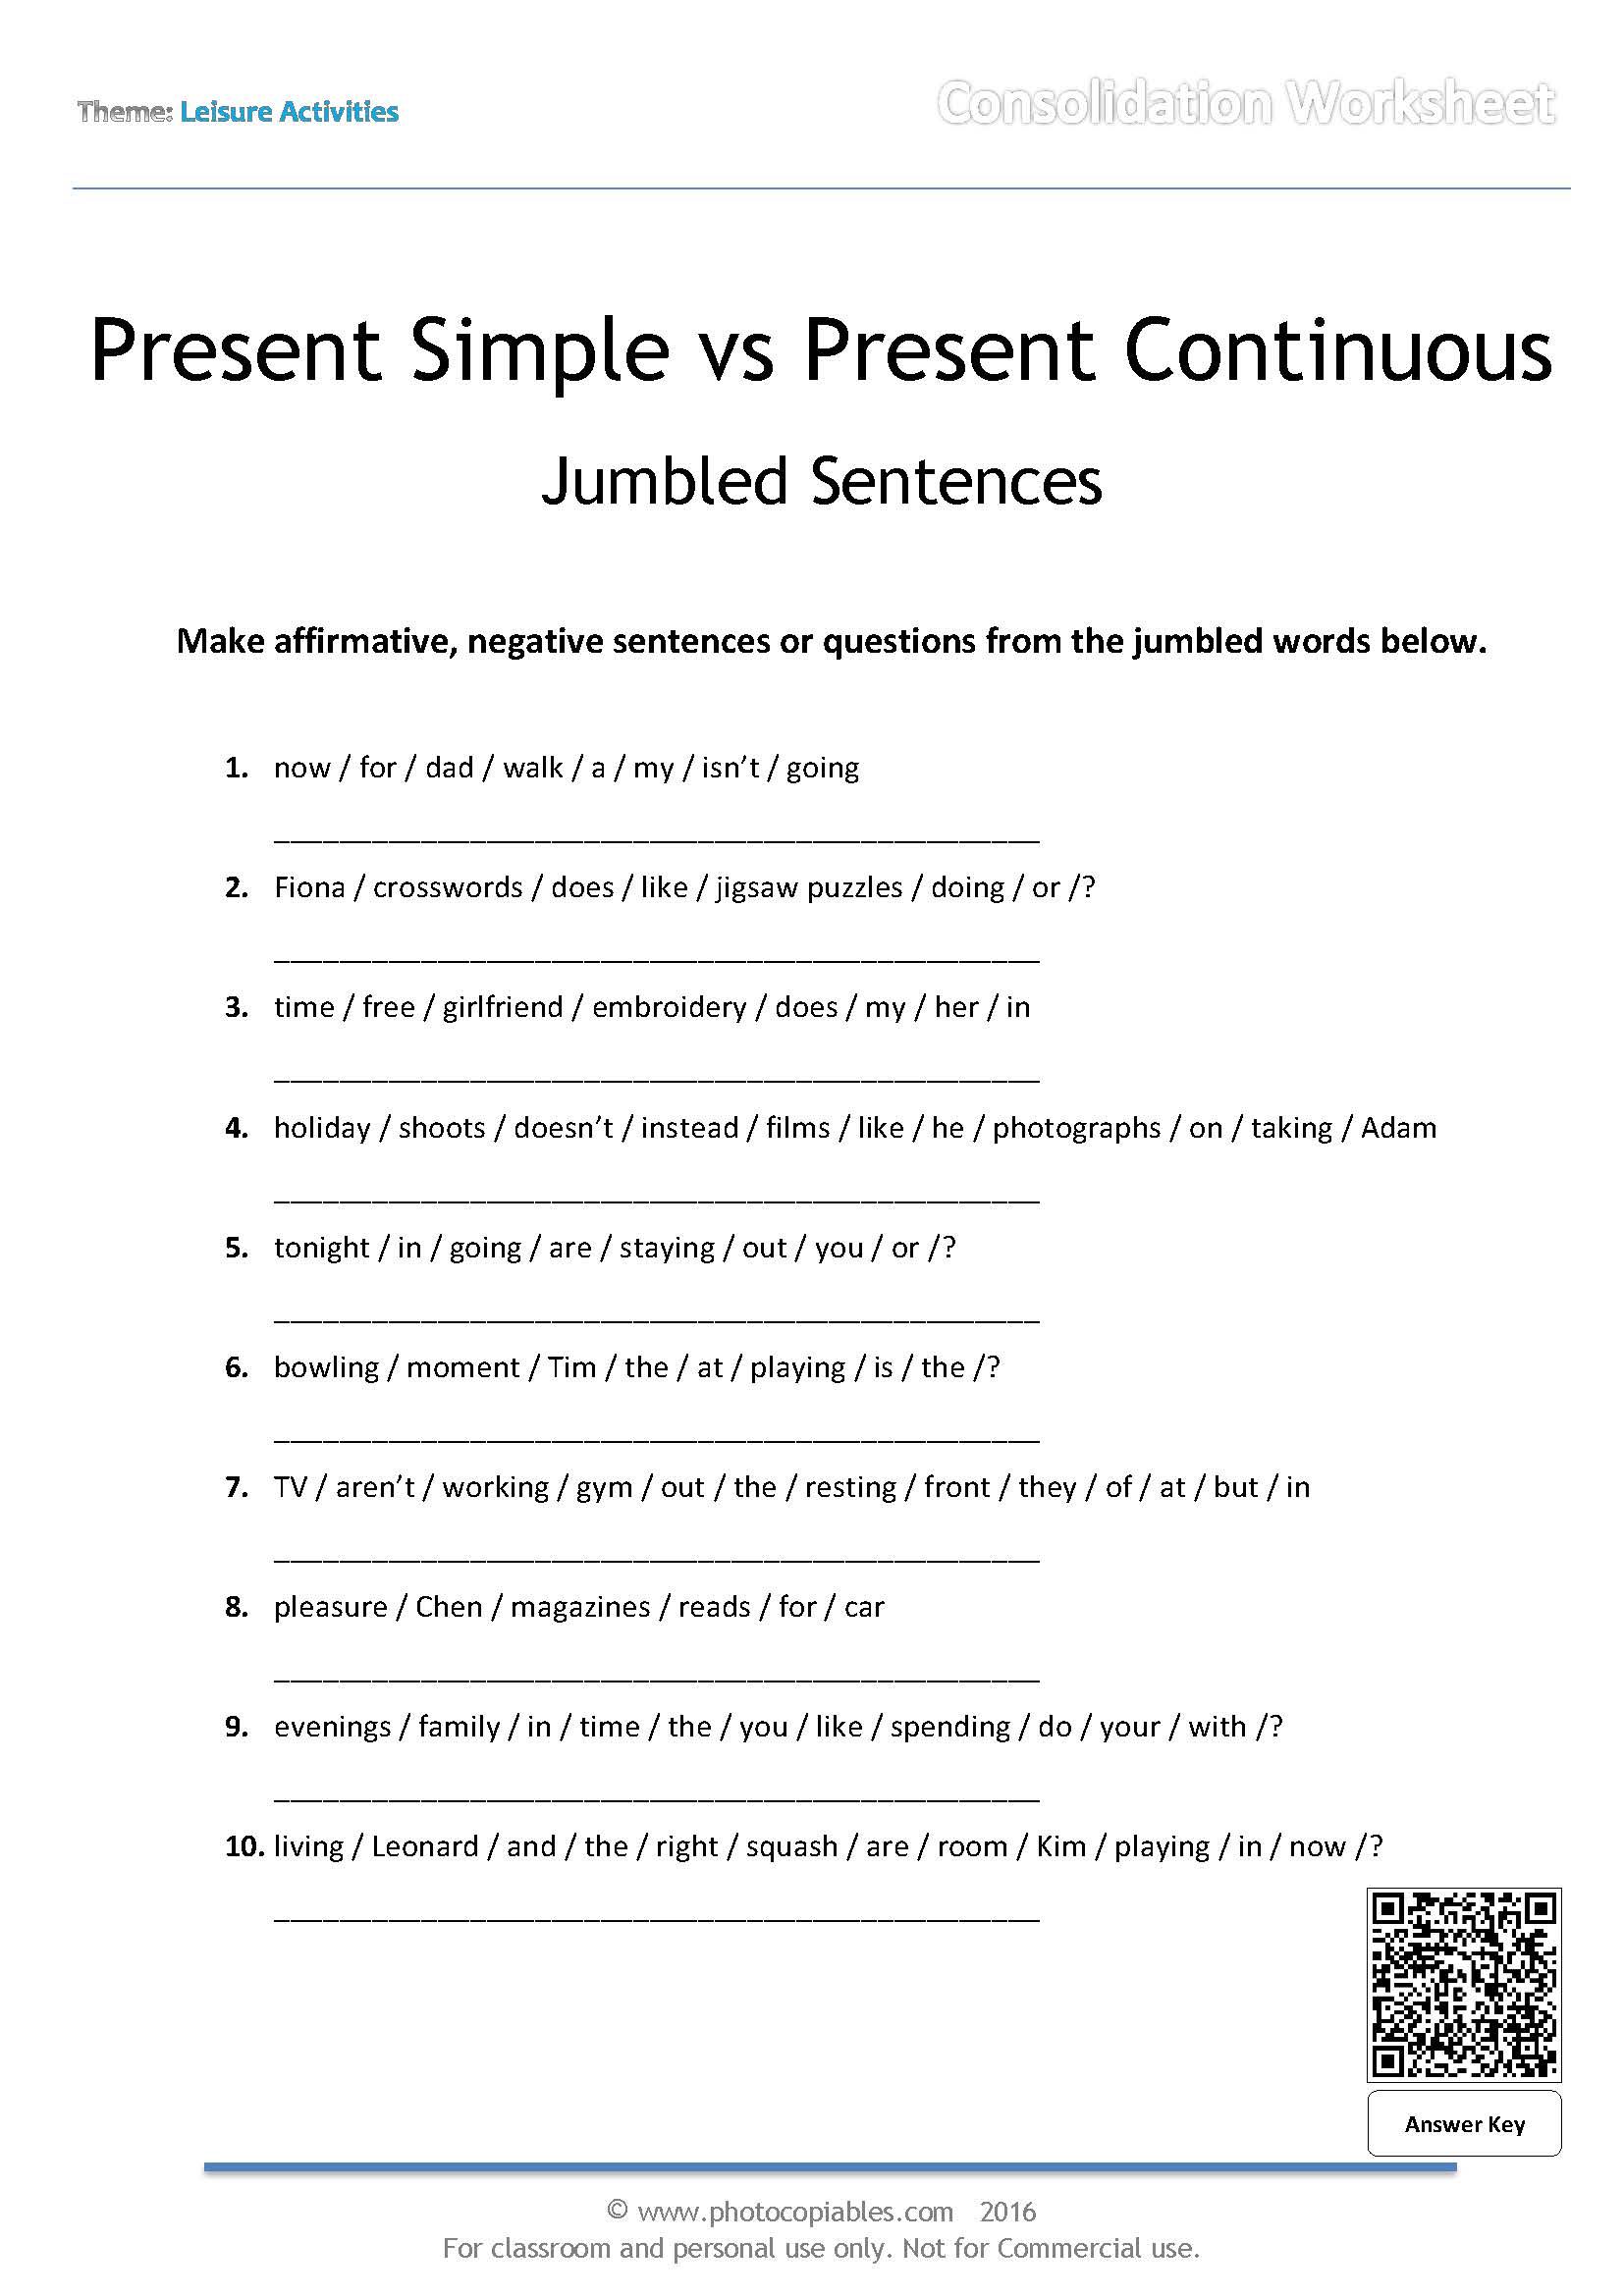 Jumbled Sentences Worksheet With Answers